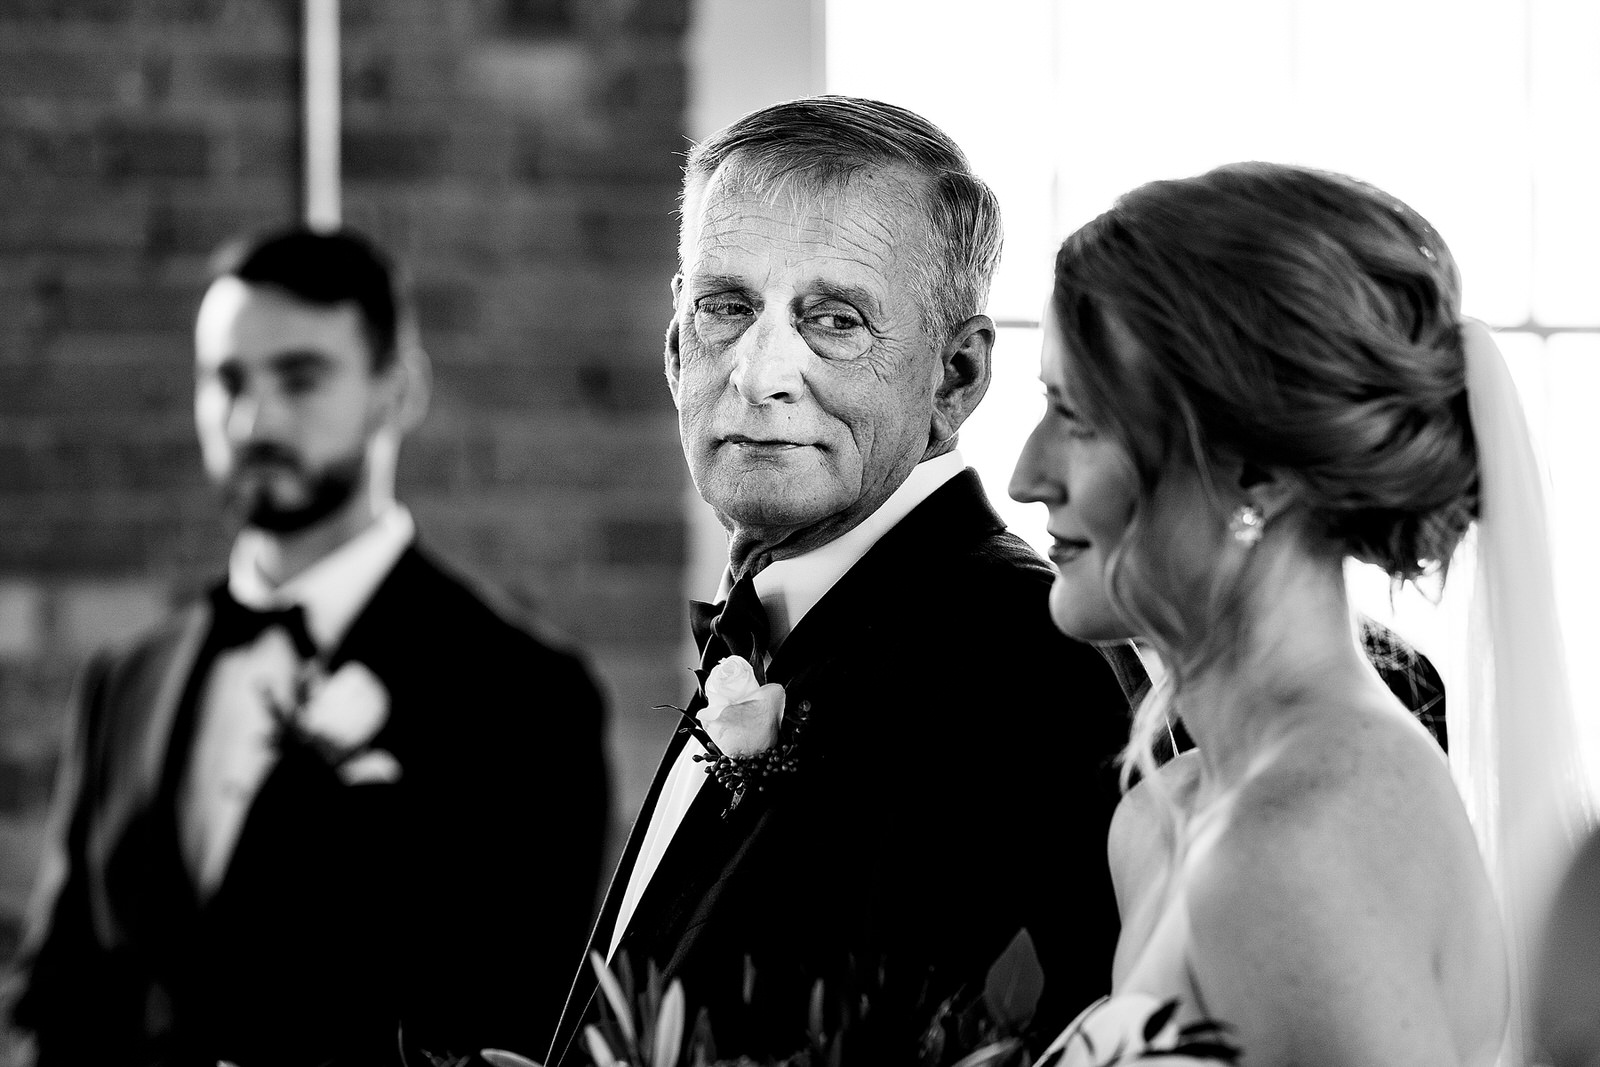 Father of the bride takes one last look after walking her down the aisle